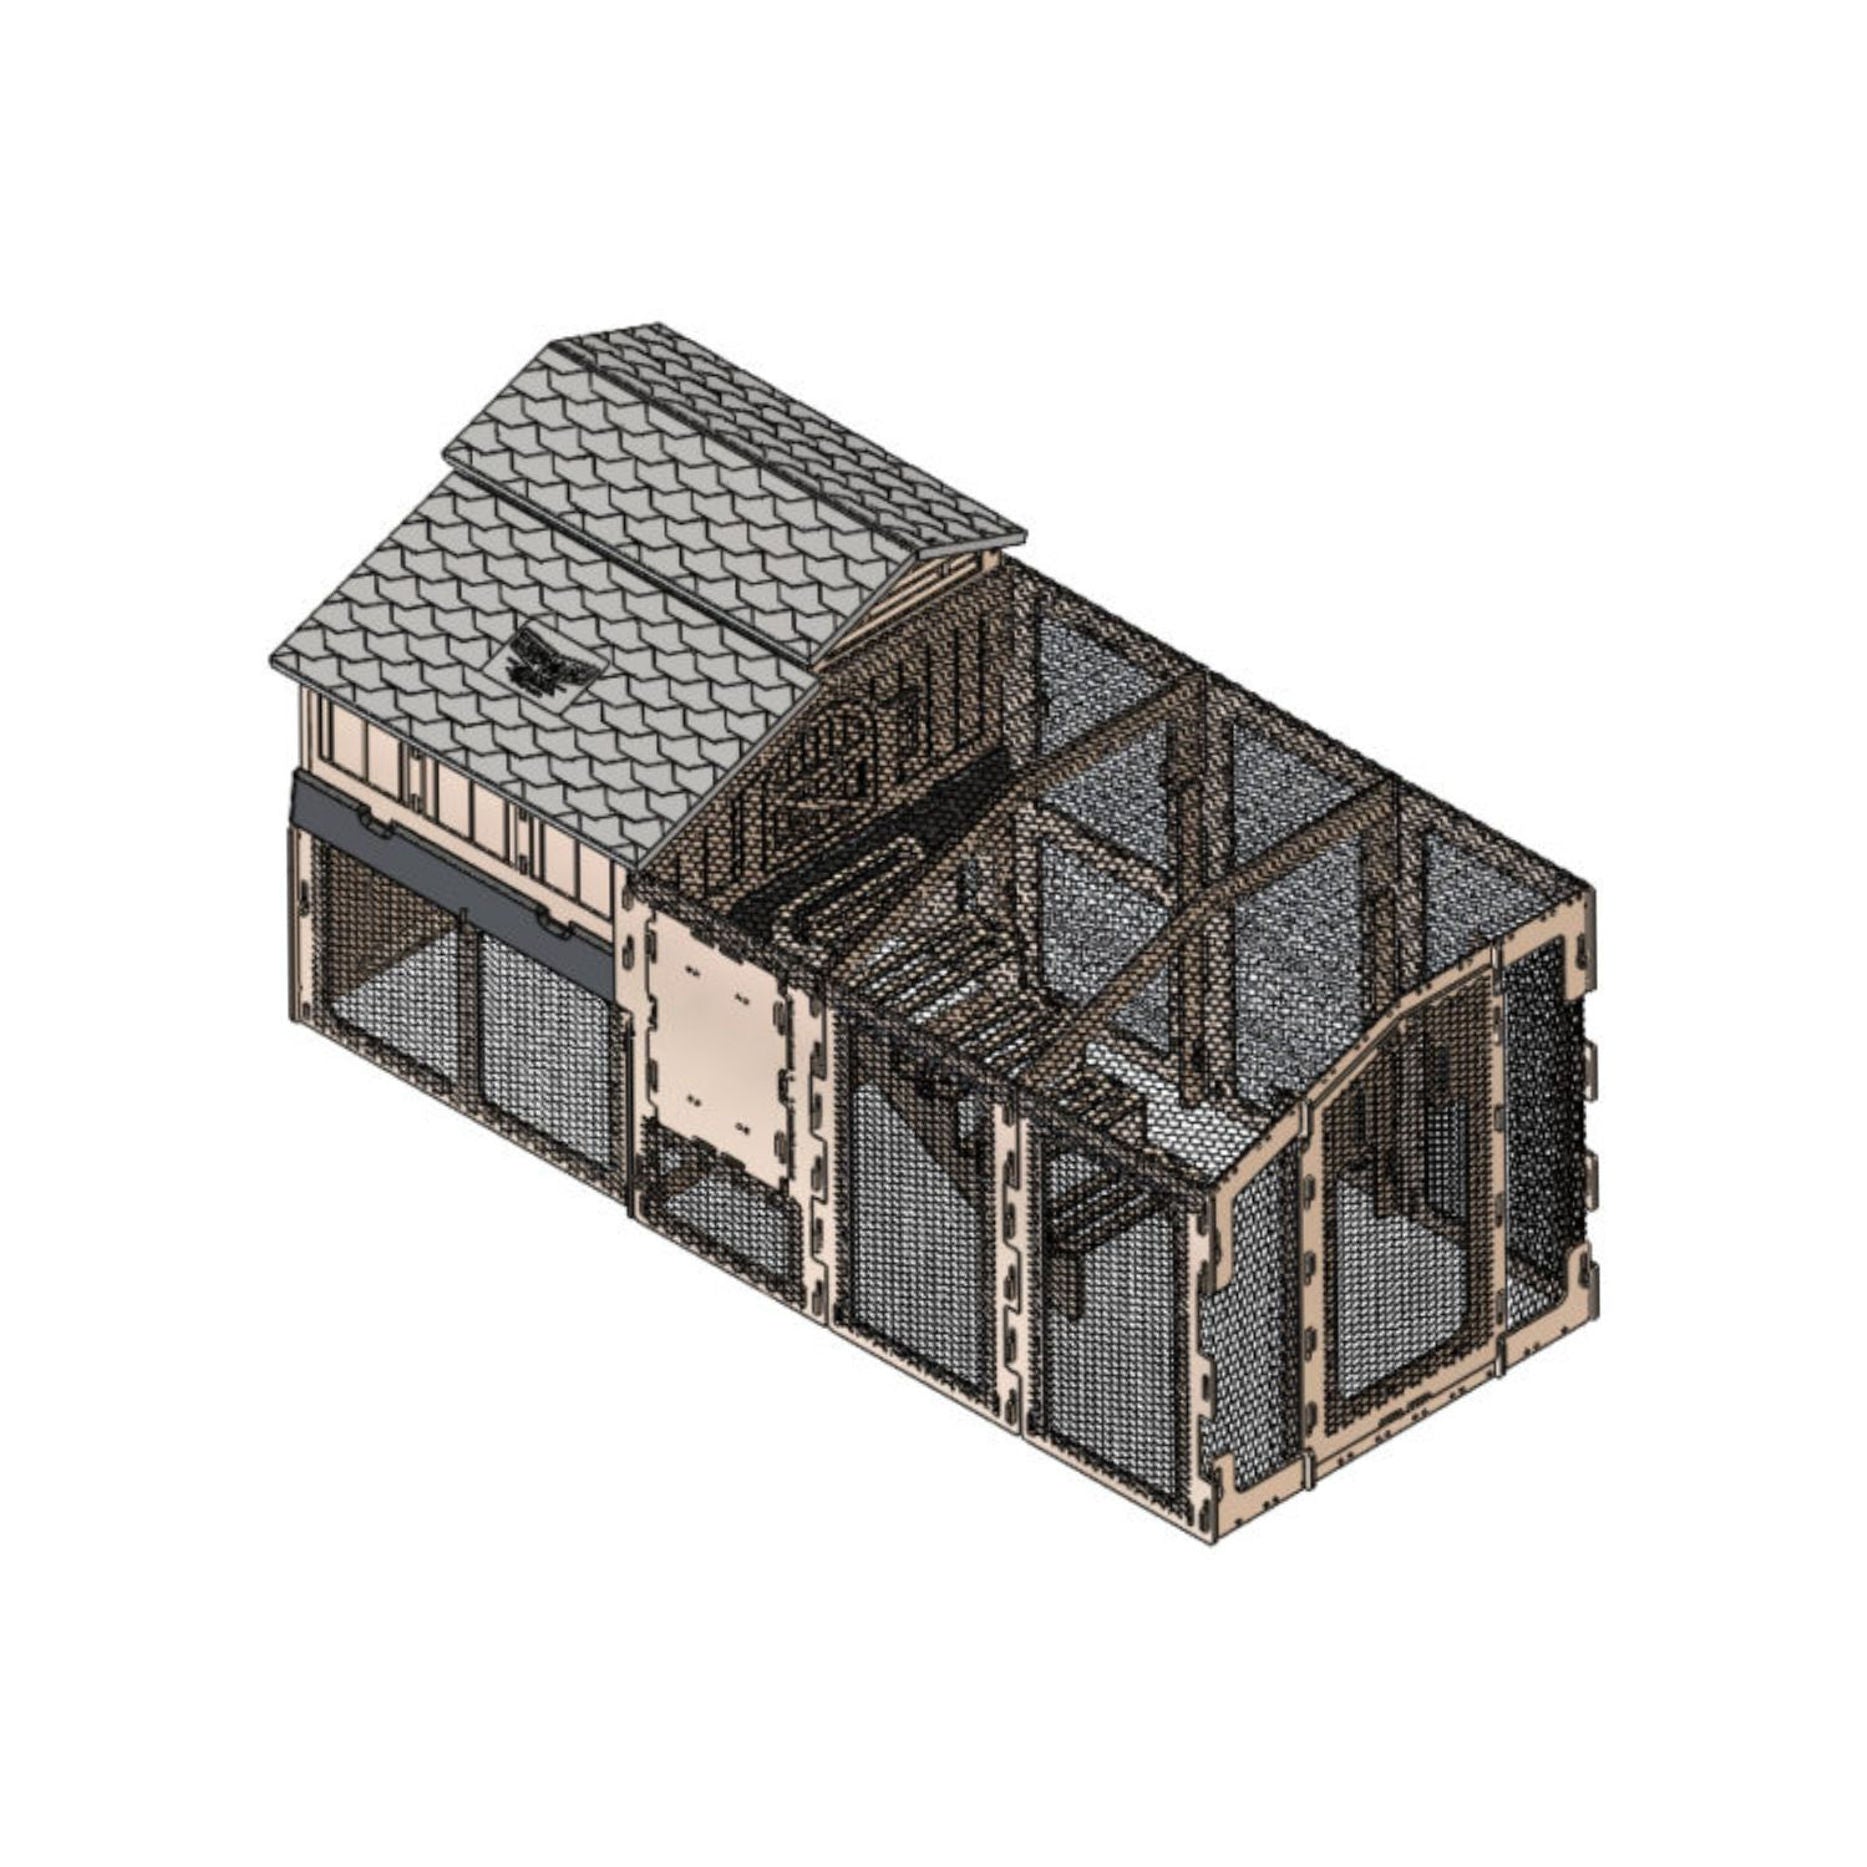 Hatching Time. 3D rendering of Formex Standard chicken coop with Chicken wire